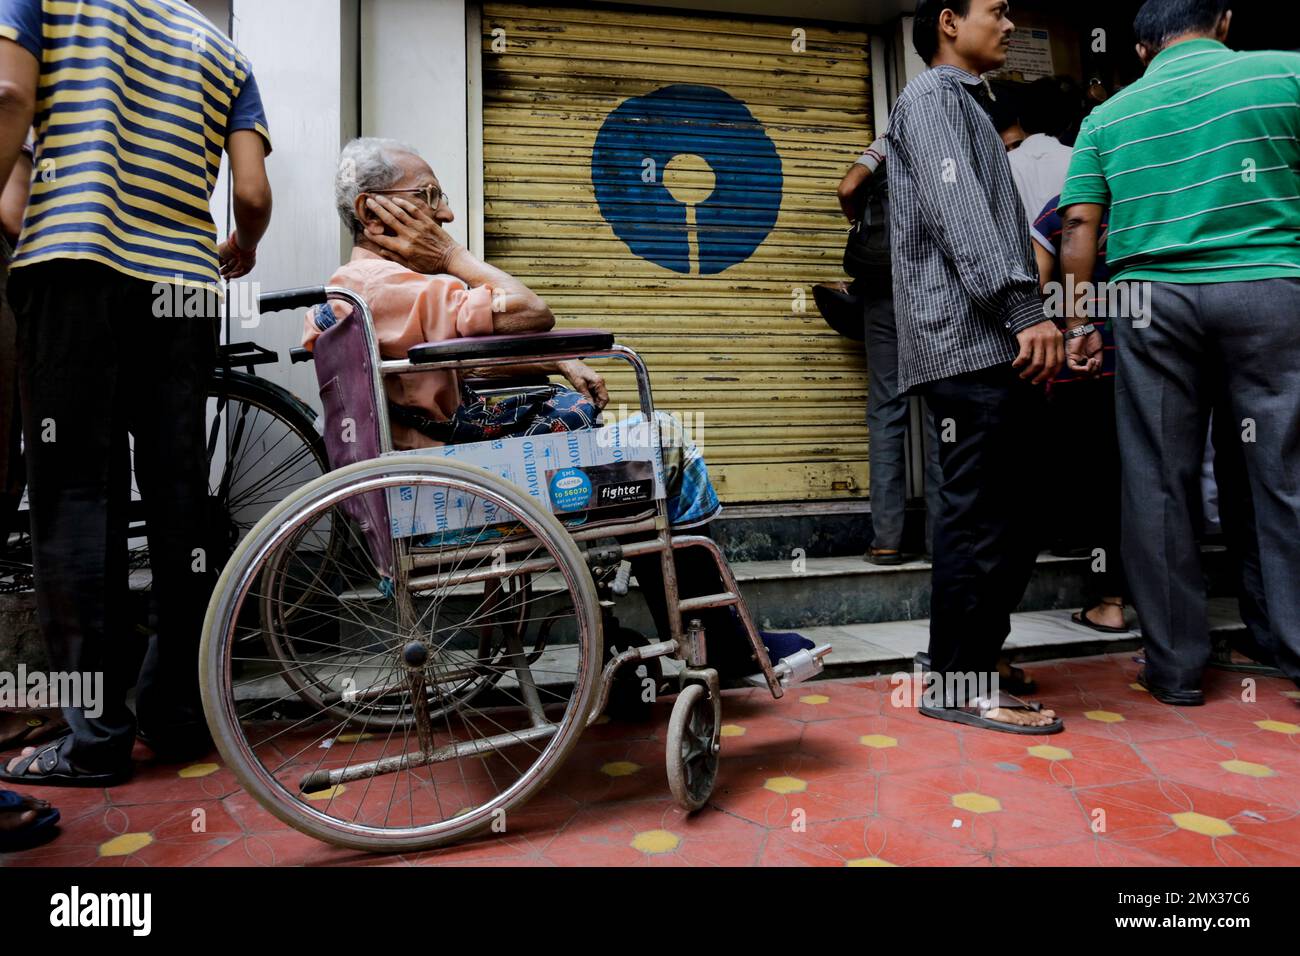 A physically disabled man on a wheel chair waits in queue to